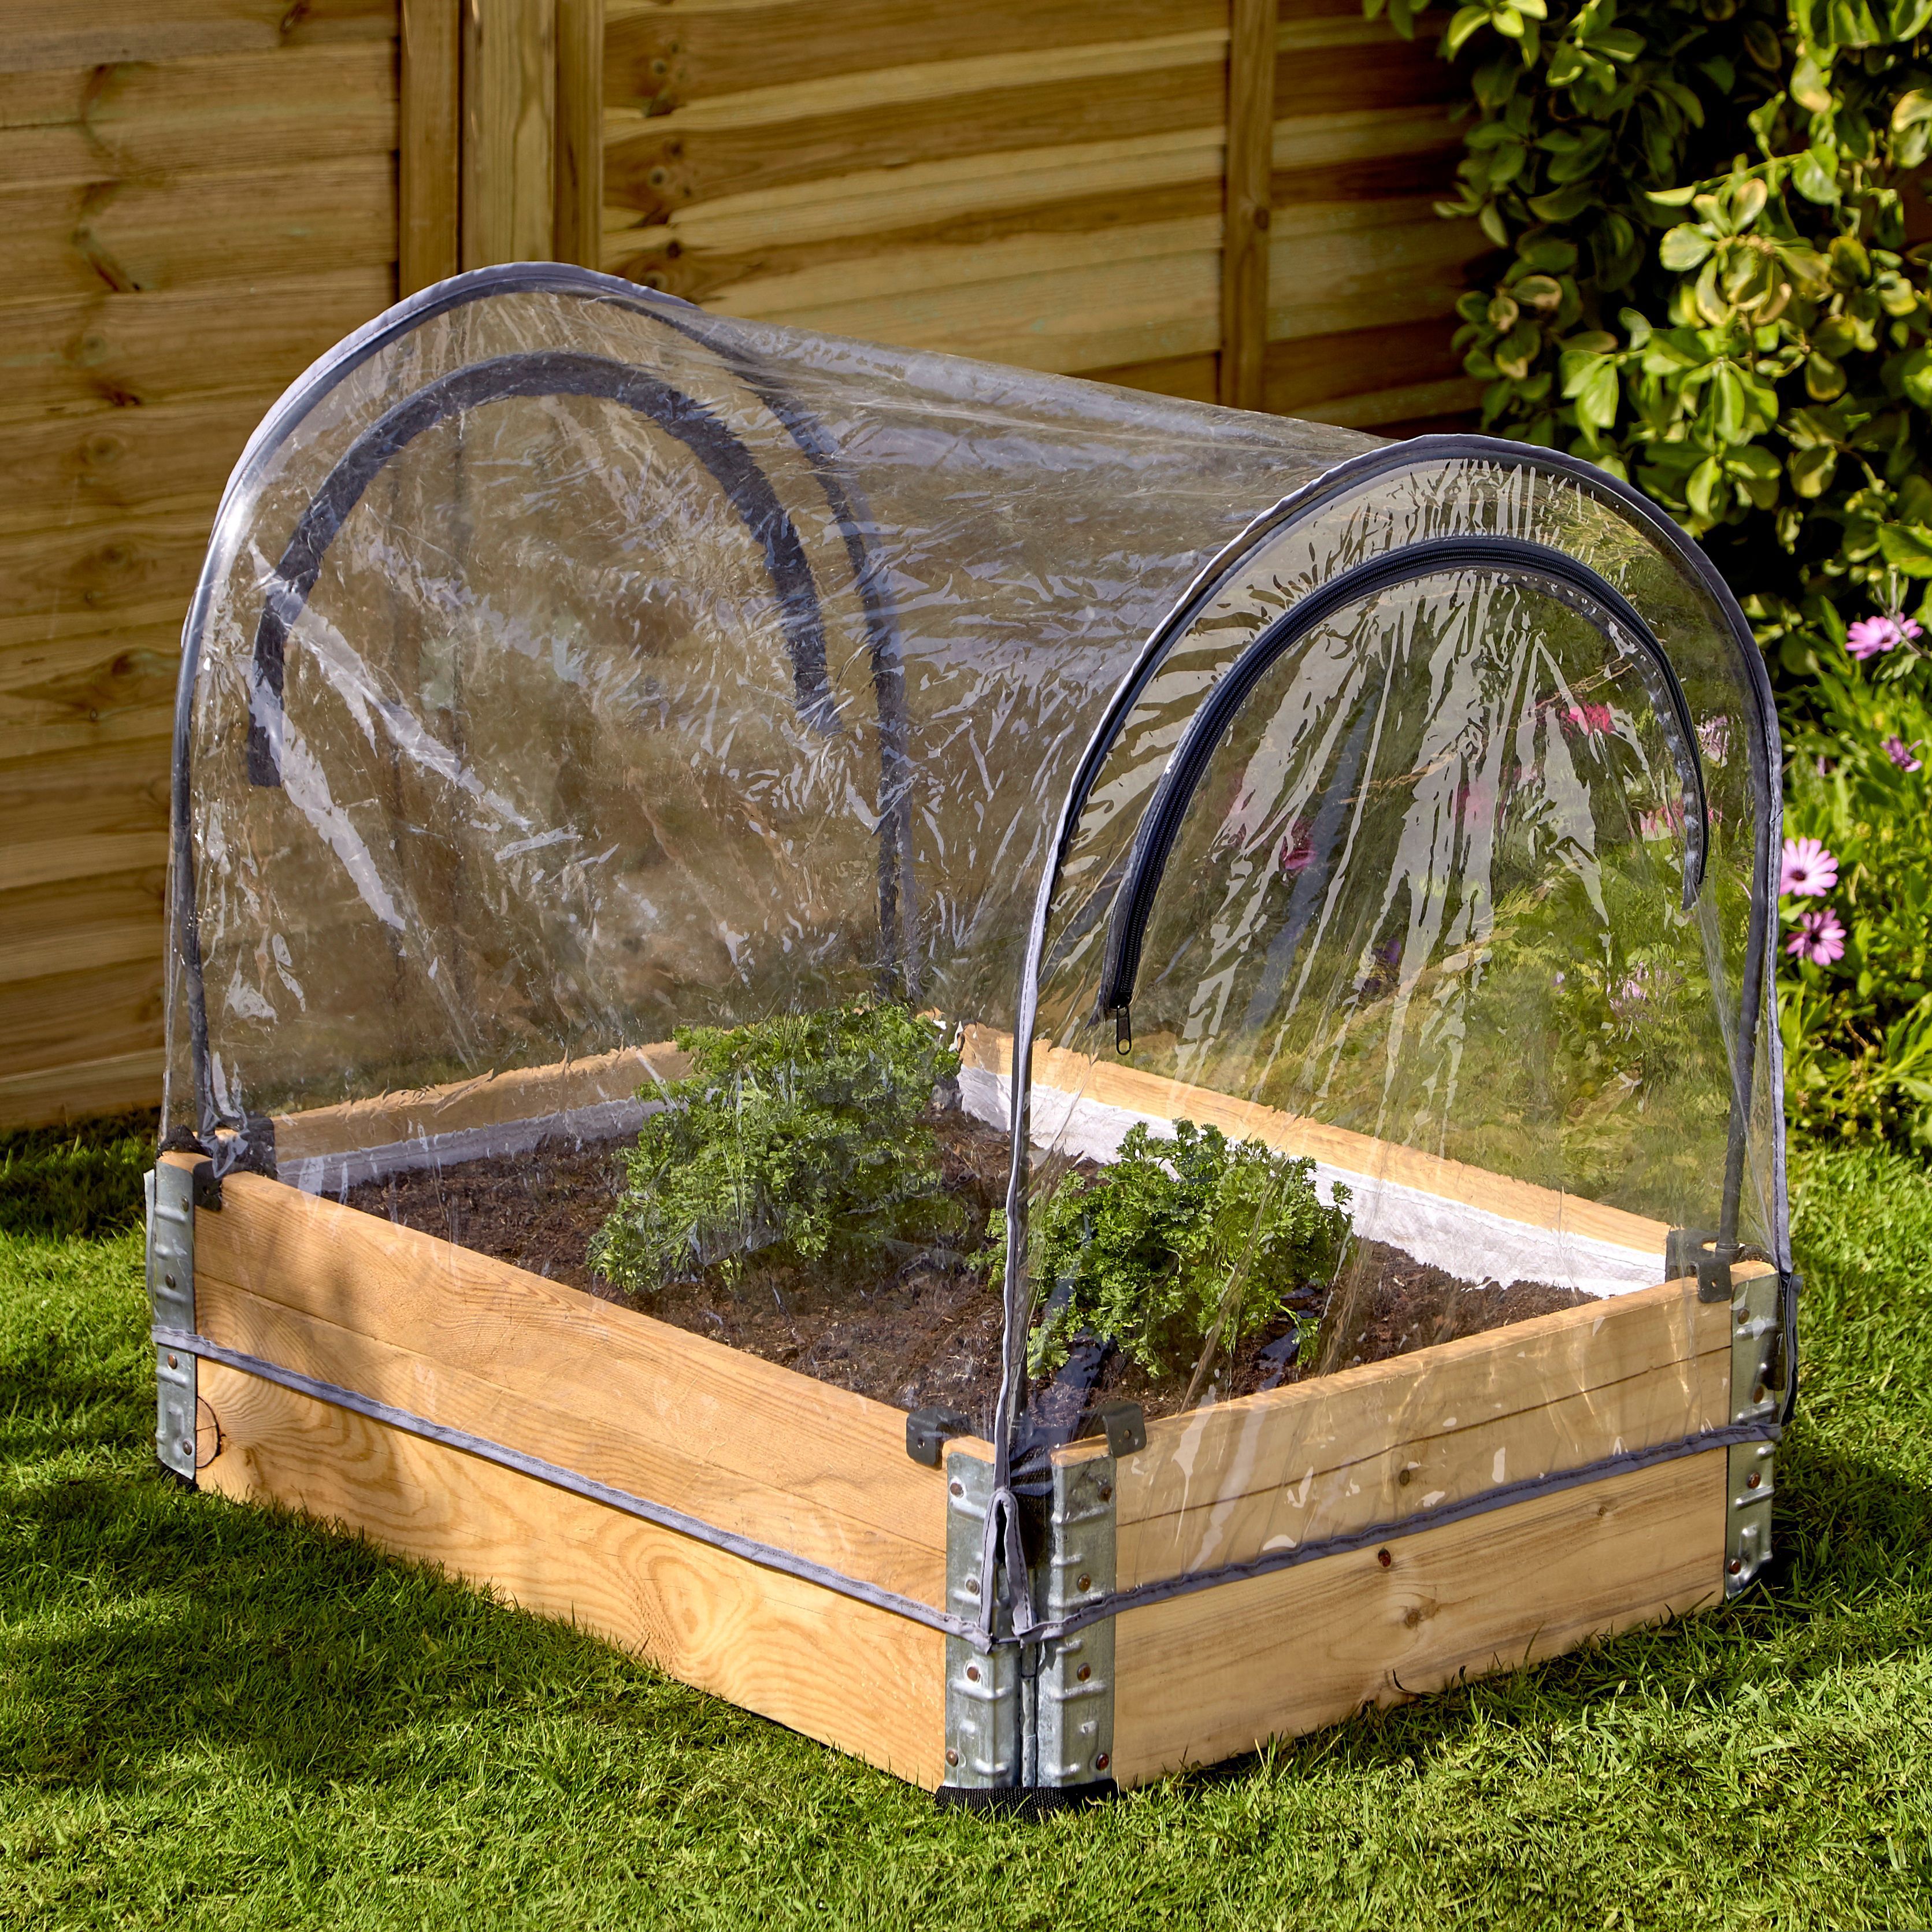 Verve Kitchen garden Small 0.42m² Grow tunnel cover with plastic cover